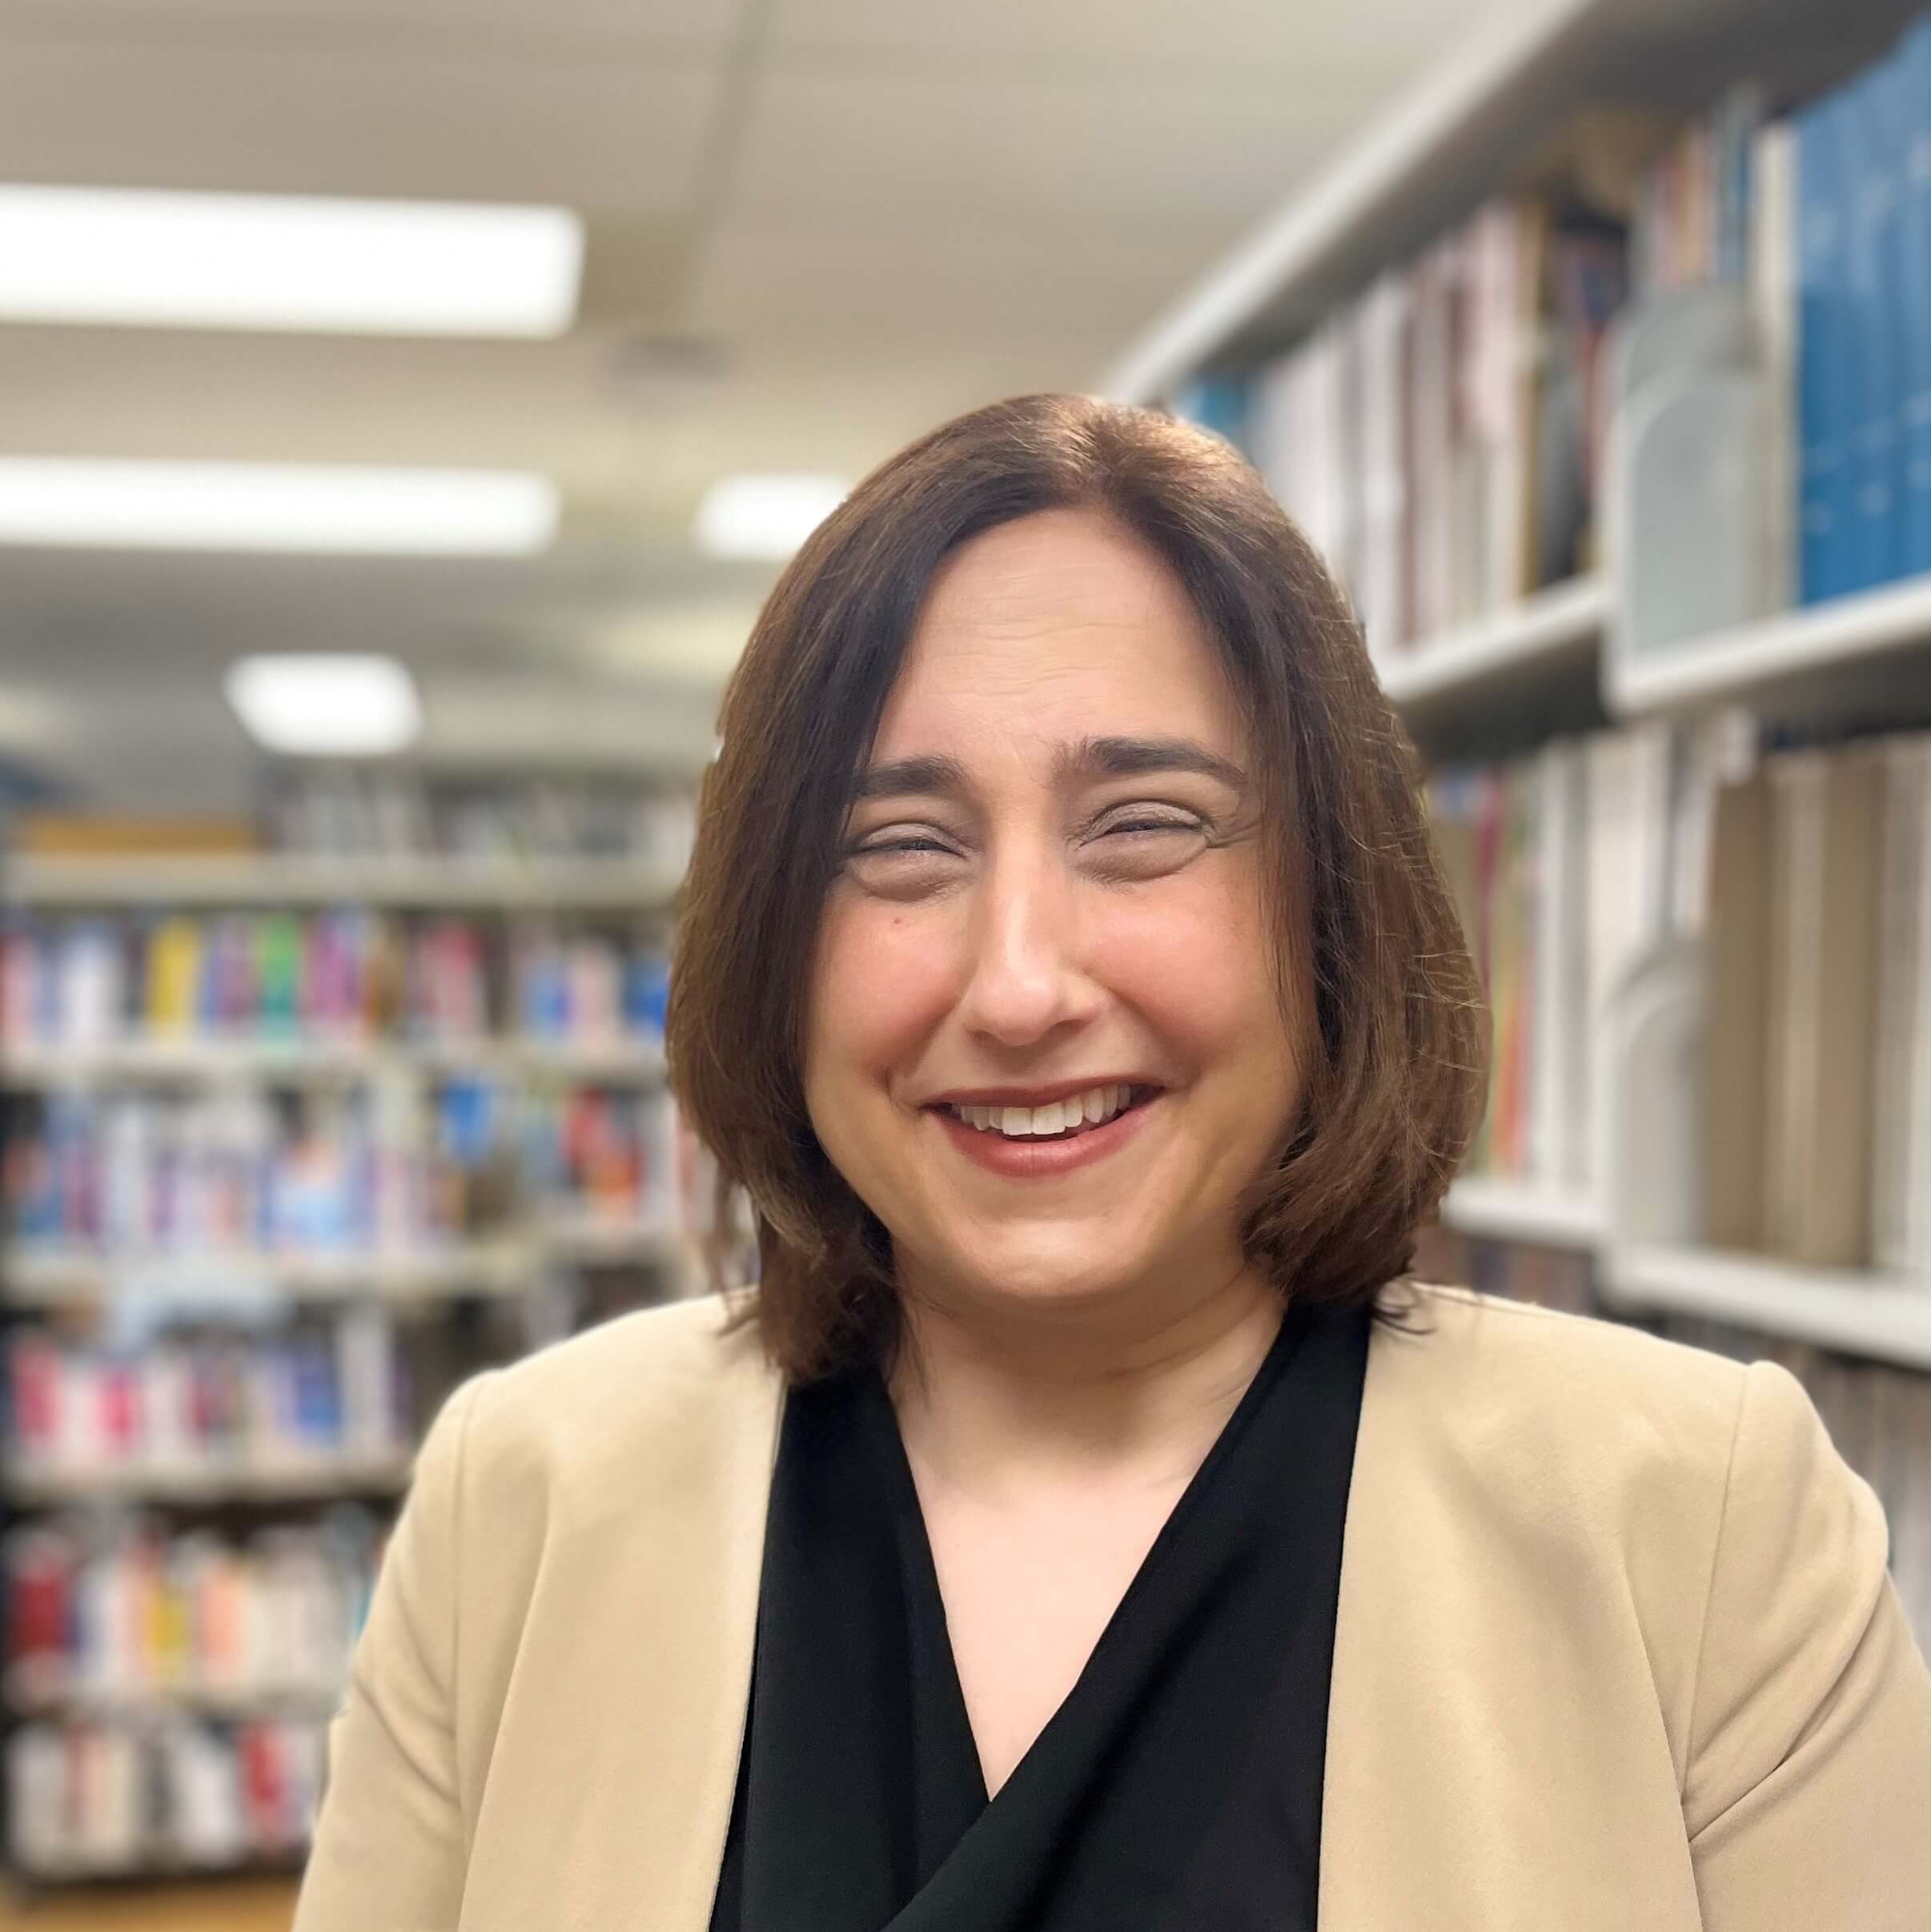 A contented woman with shoulder-length brown hair, smiling with closed eyes, wearing a beige blazer over a black top, posed in front of bookshelves.